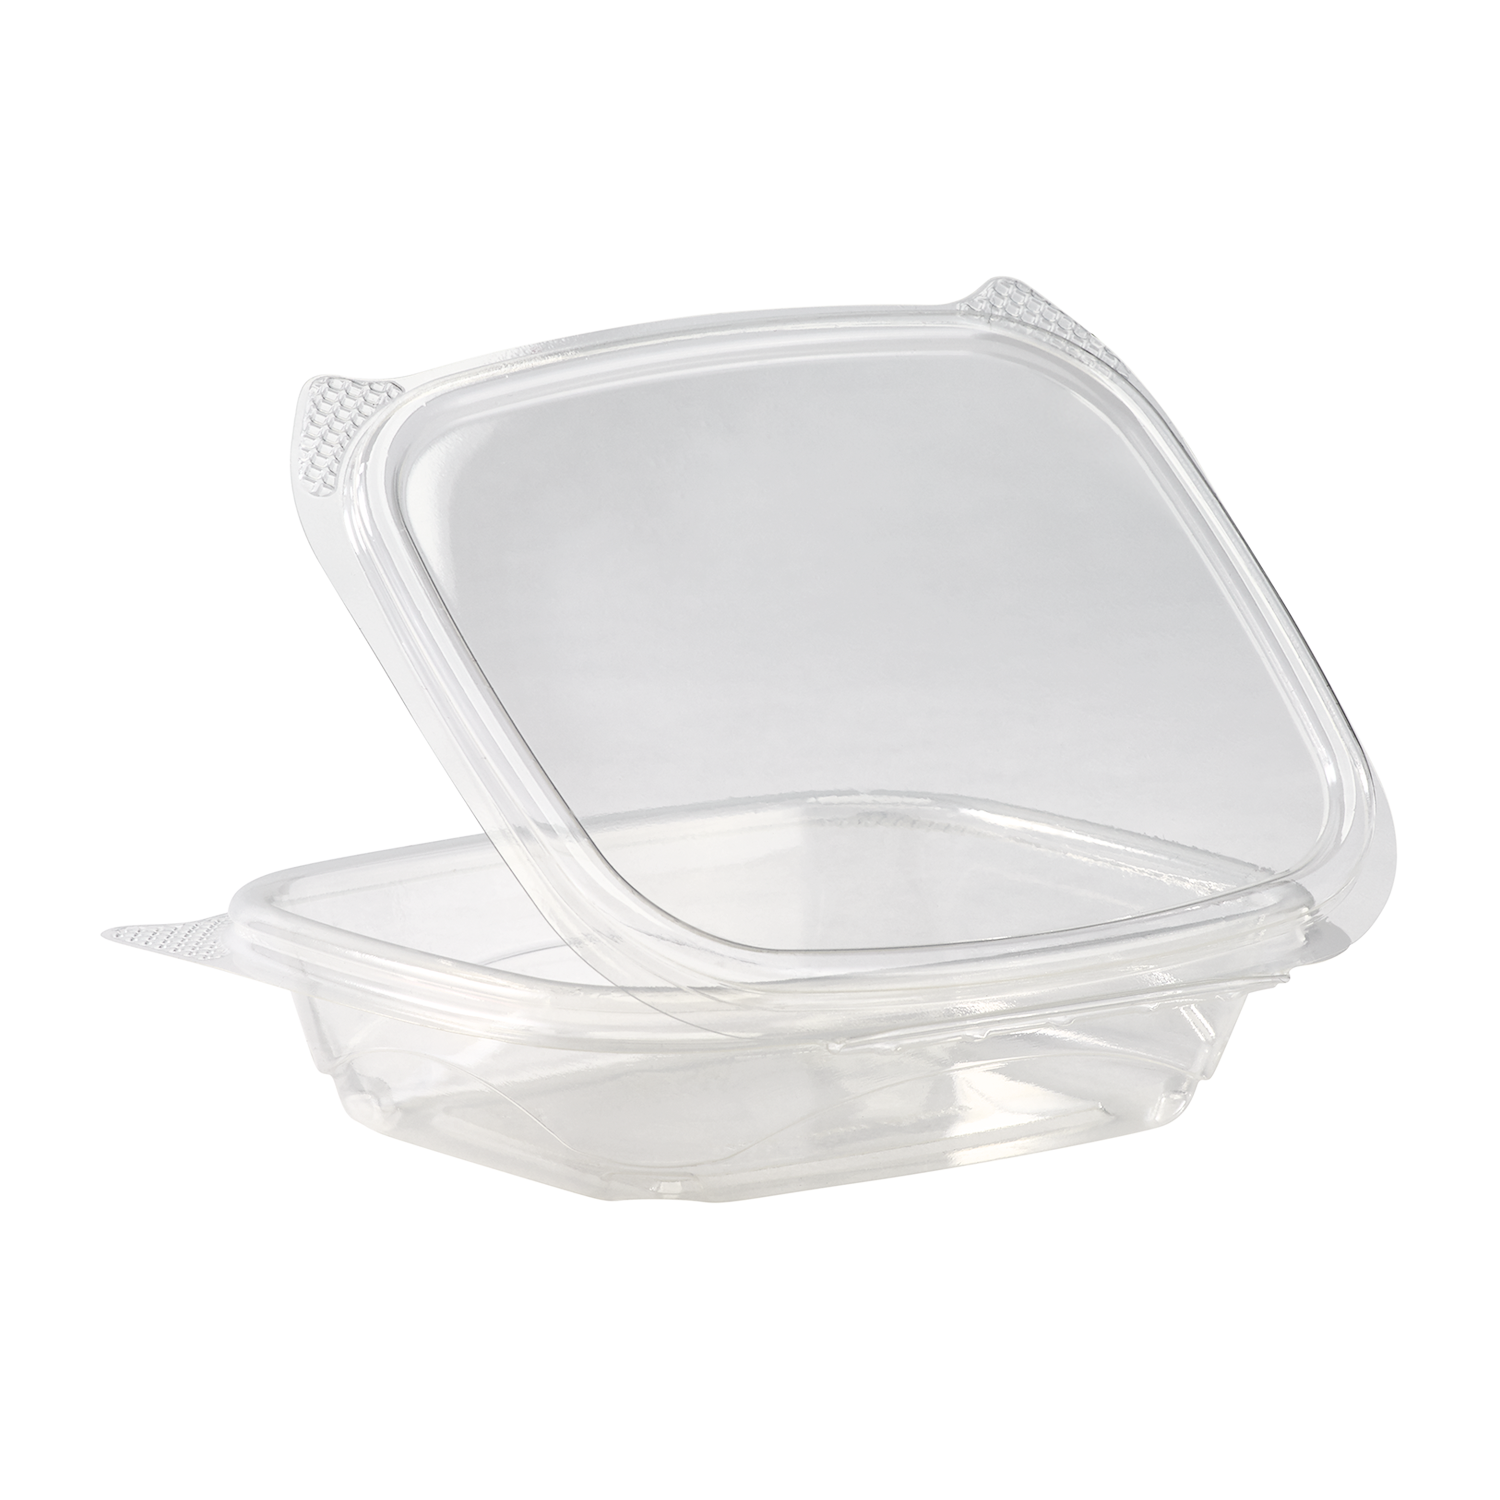 Restaurantware Tamper Tek 8 Ounce Take Out Containers, 100 Tamper-Evident Deli Containers - Hinged Lid, Freezable, Clear Plastic Meal Prep